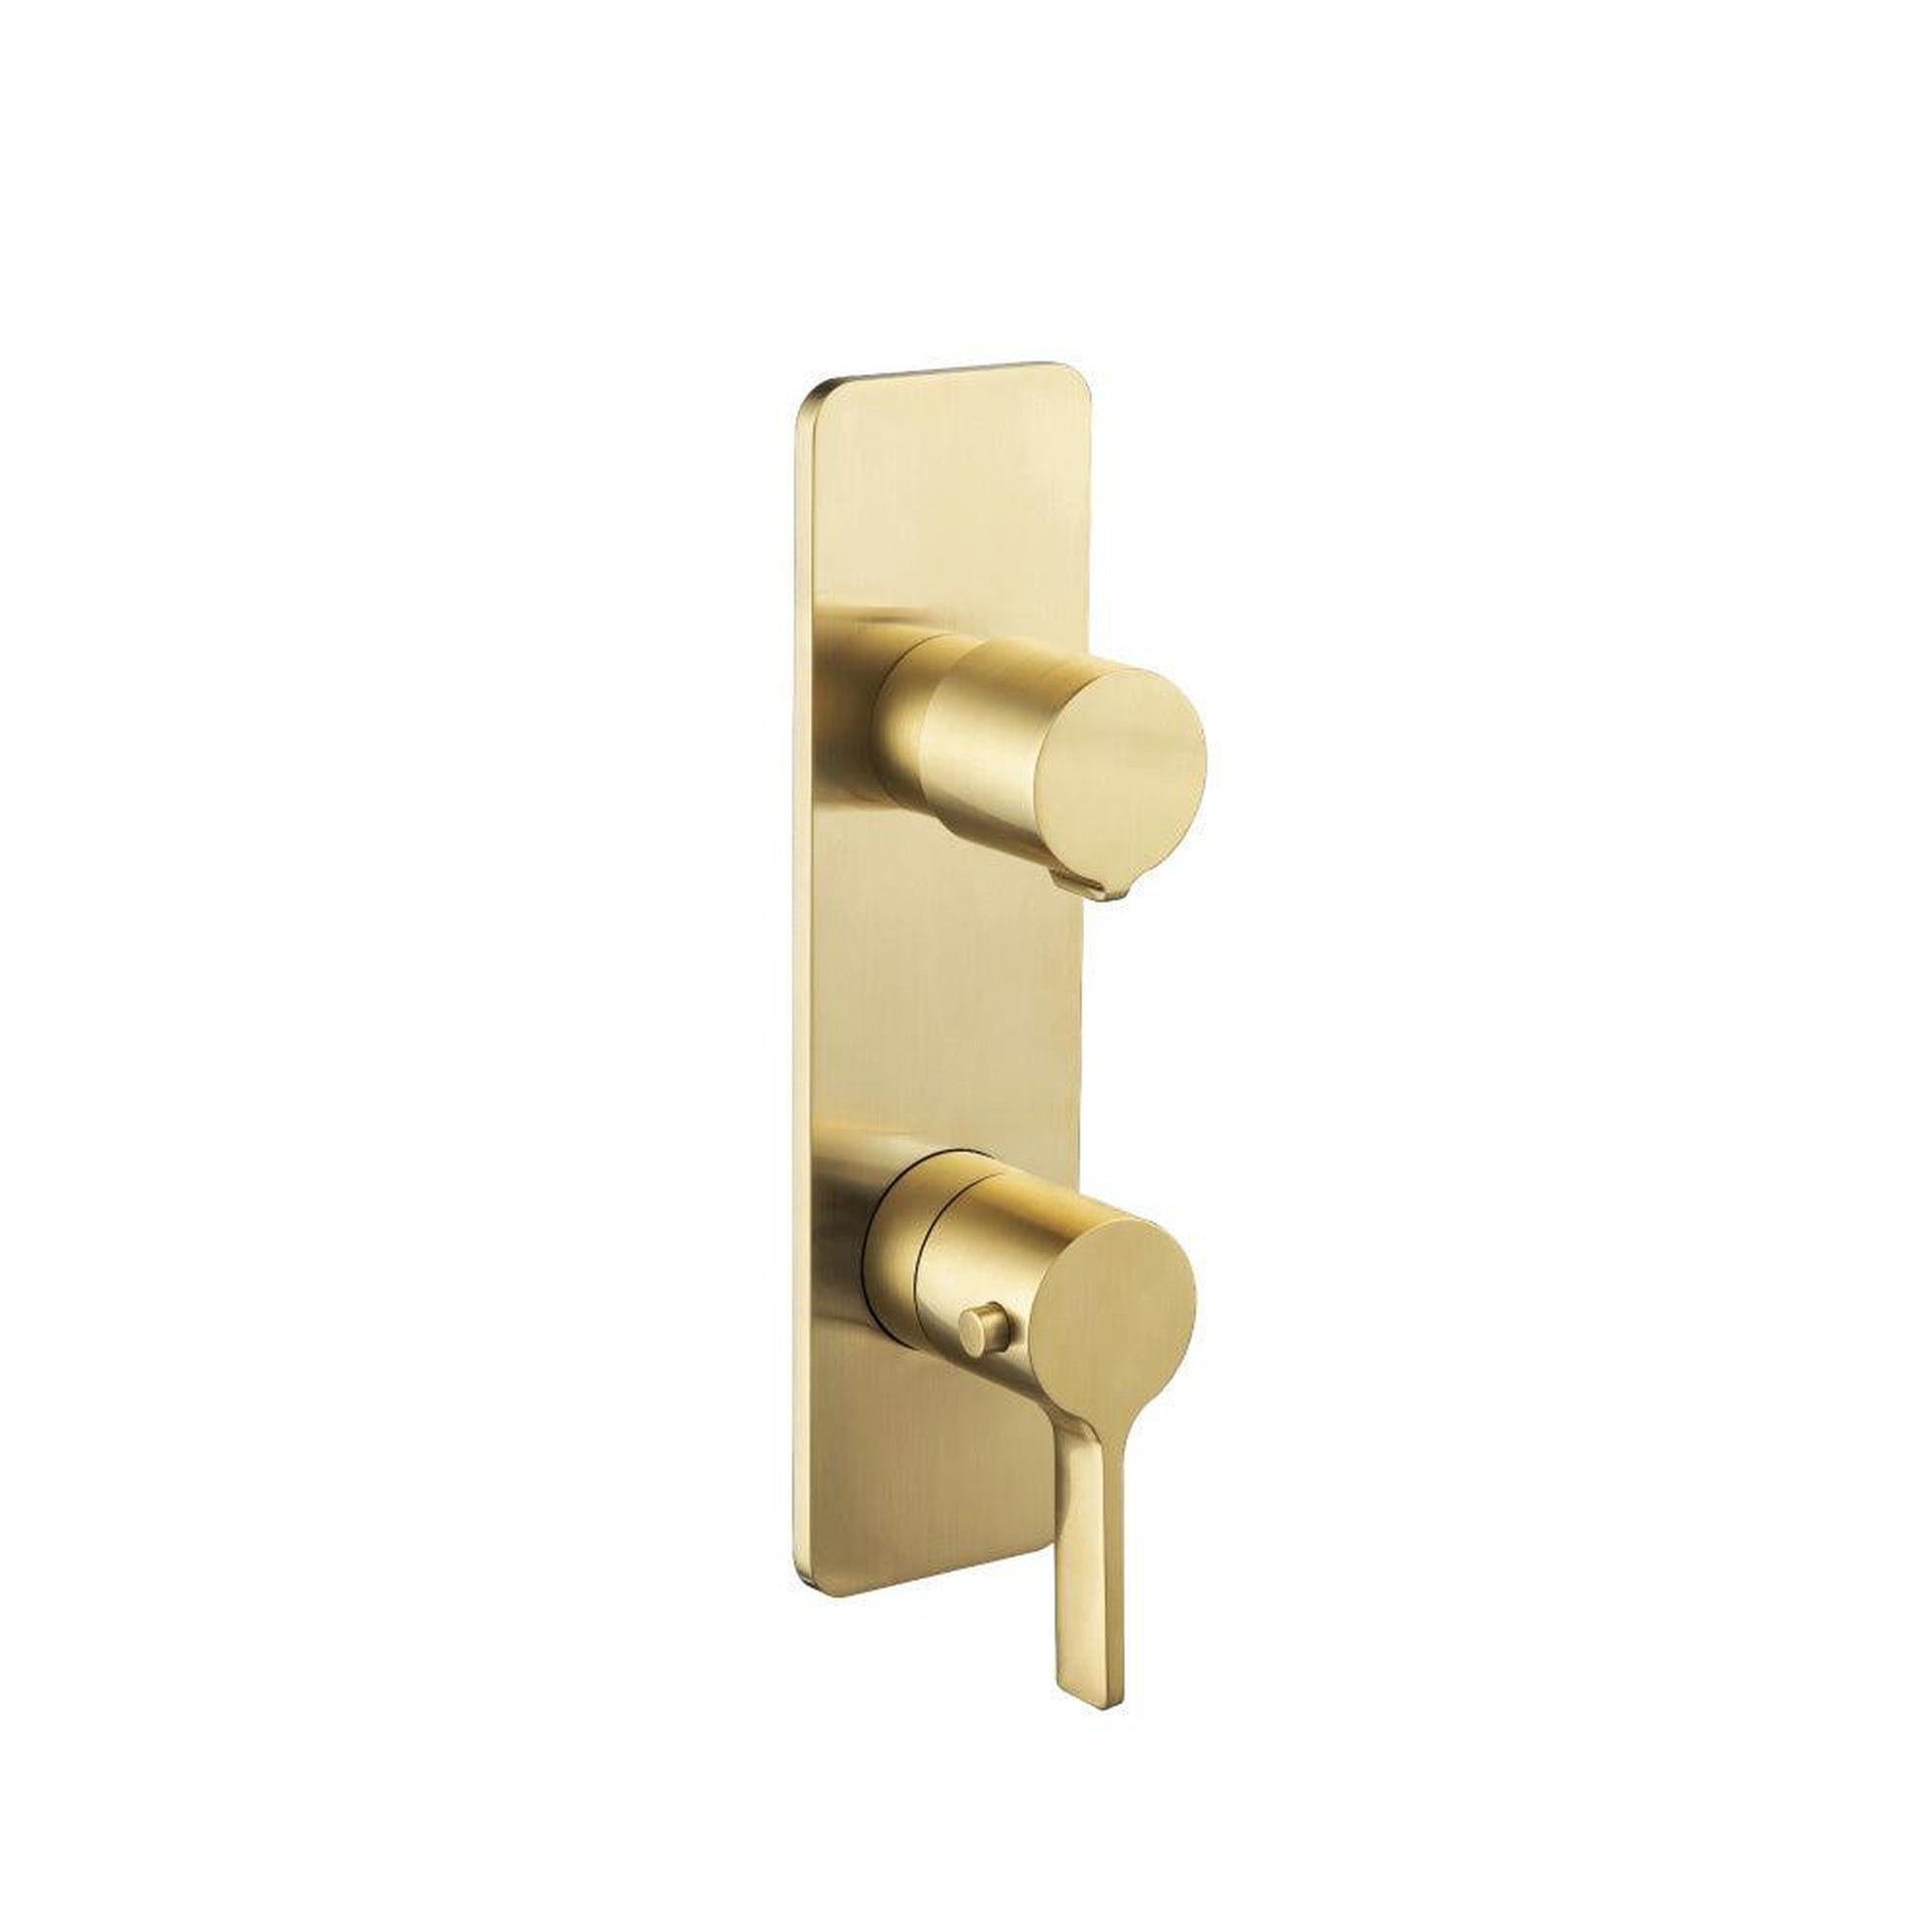 Isenberg Serie 260 3/4" Single Output Horizontal Thermostatic Shower Valve and Trim in Satin Brass (260.2720SB)